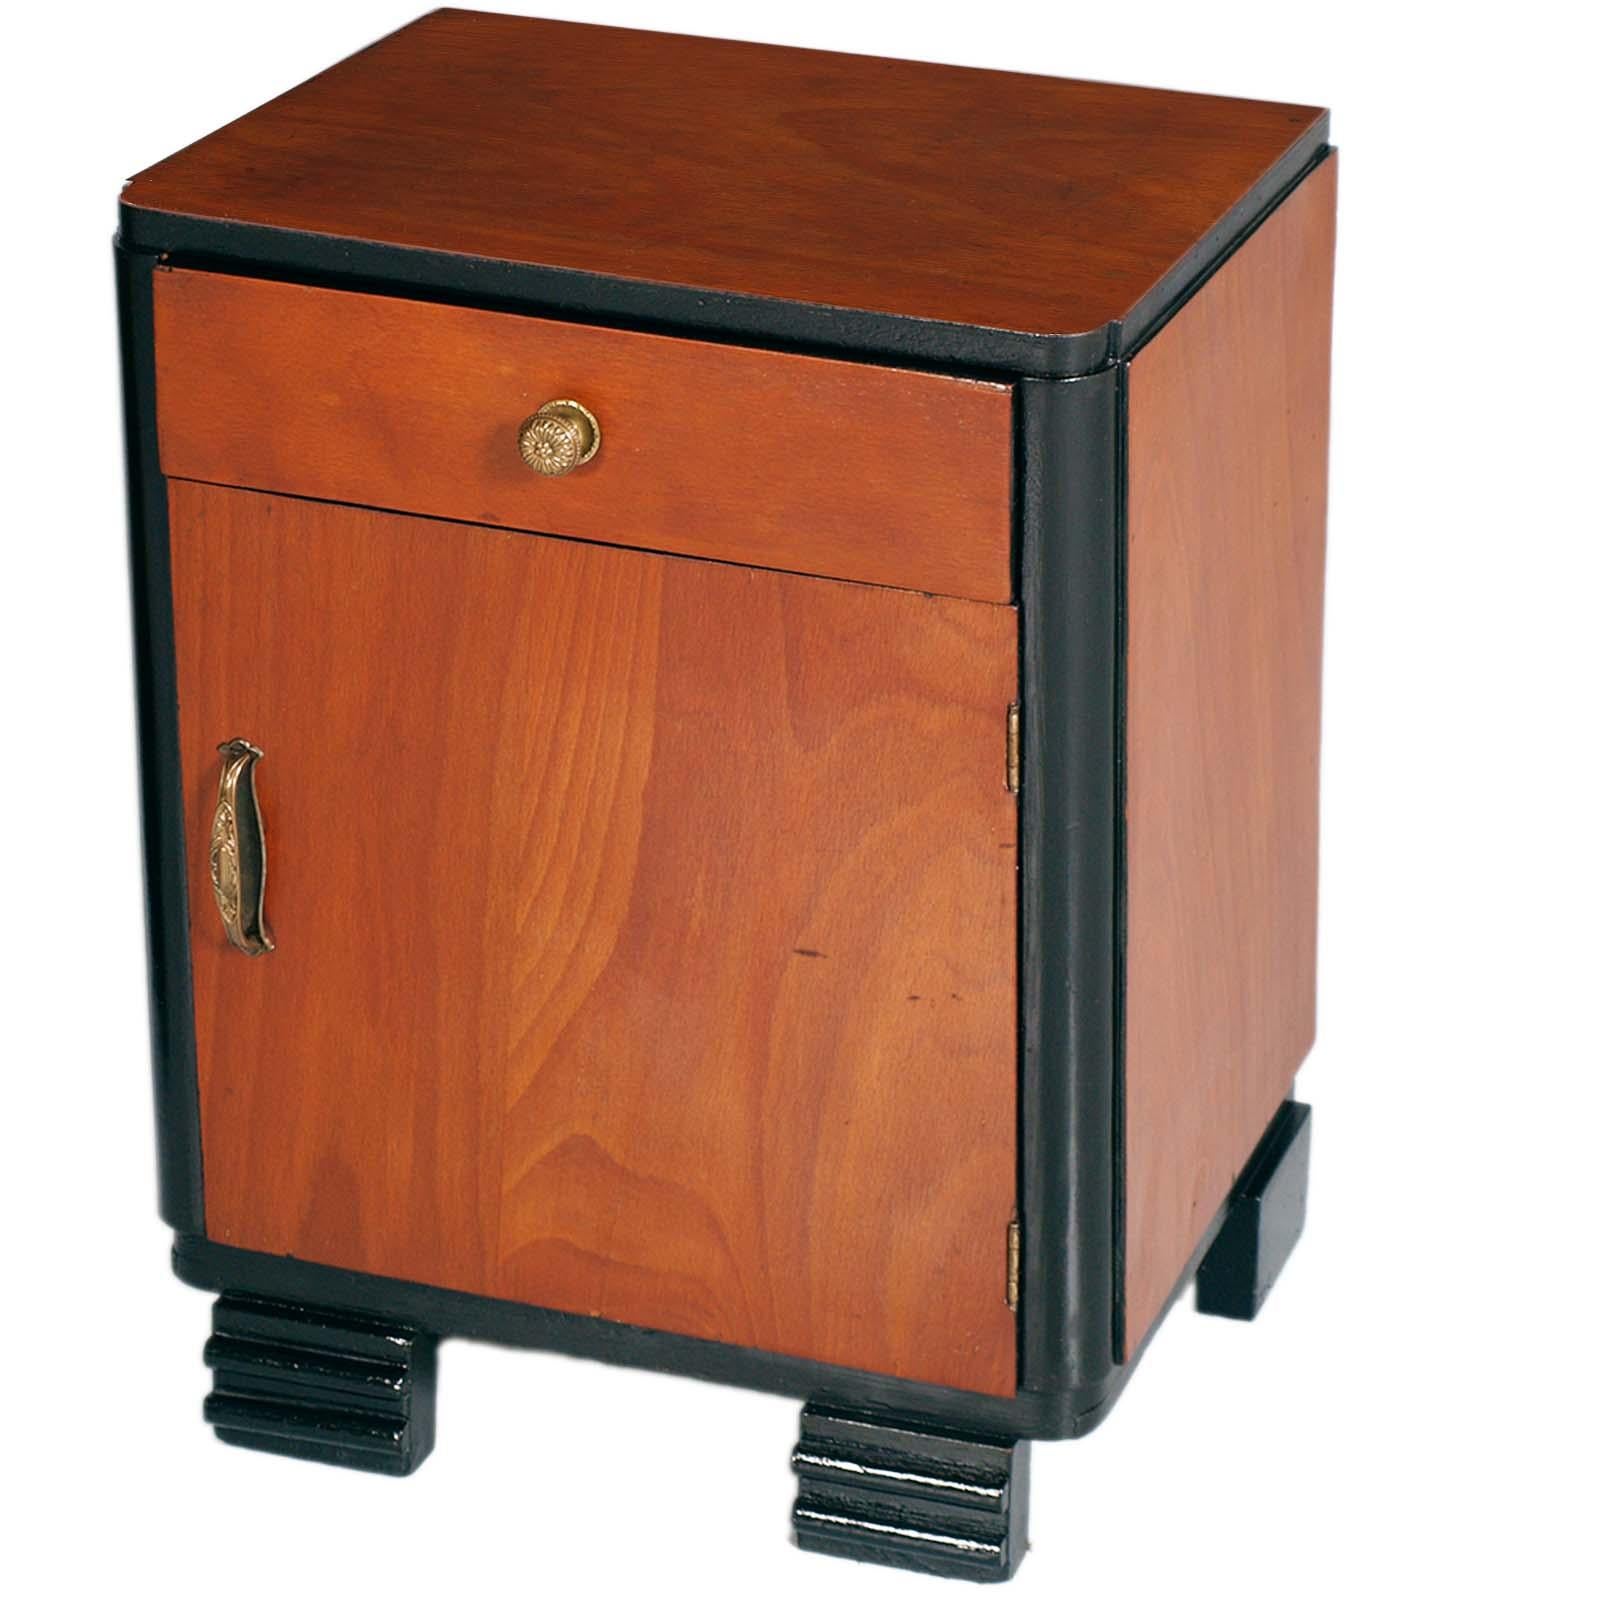 All original Italian 1920s Art Deco bedside table nightstands in ebonized walnut & veneer walnut by  Consorzio Mobili Cantù
The shapes are the classics of the first Italian art deco

Measures cm: H 62 x W 47 x D 35.